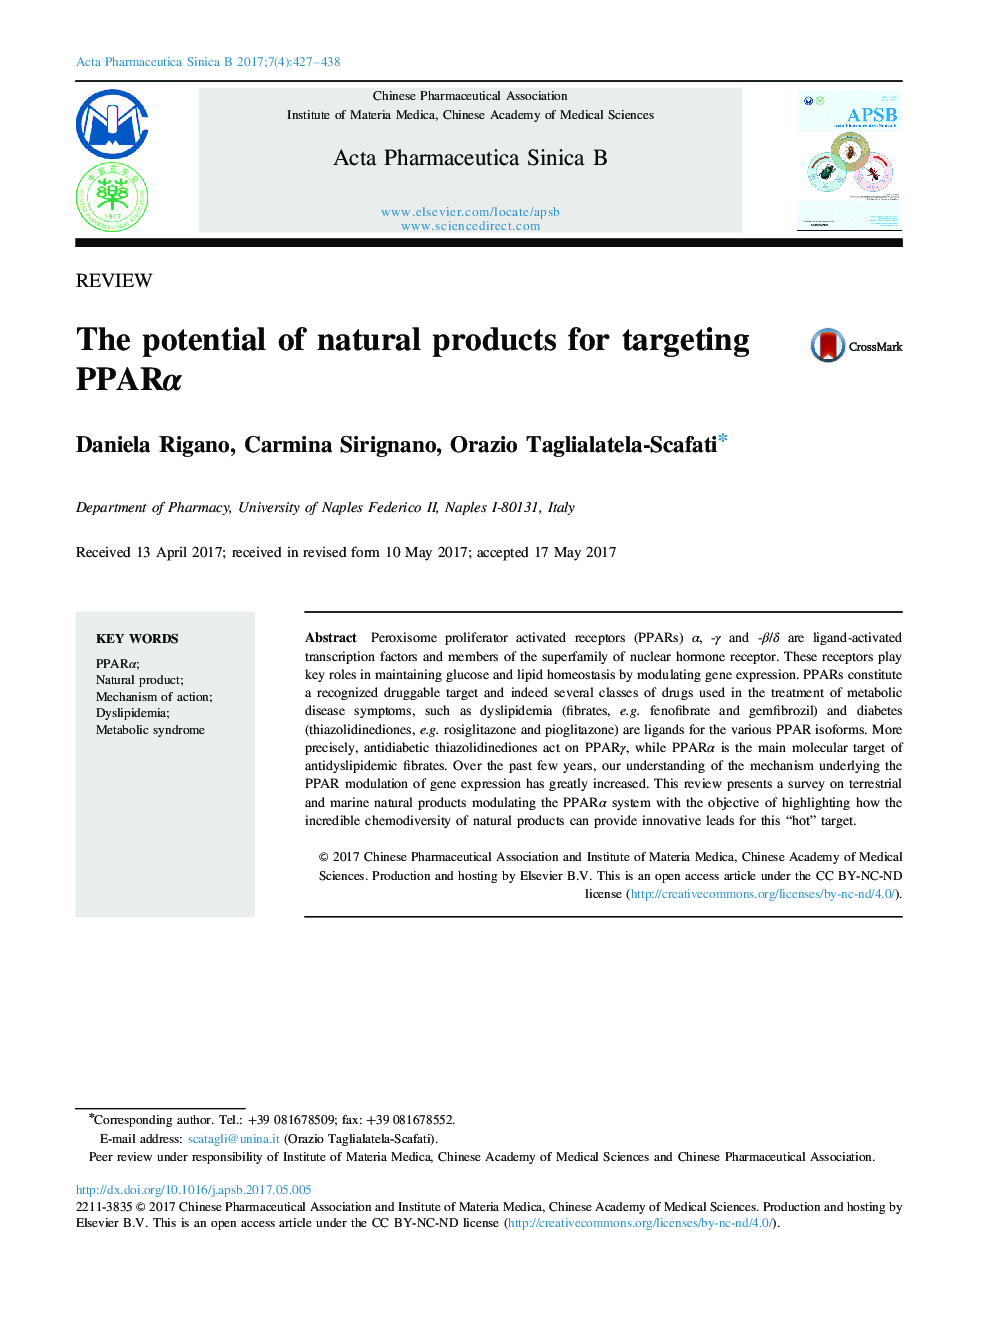 The potential of natural products for targeting PPARÎ±